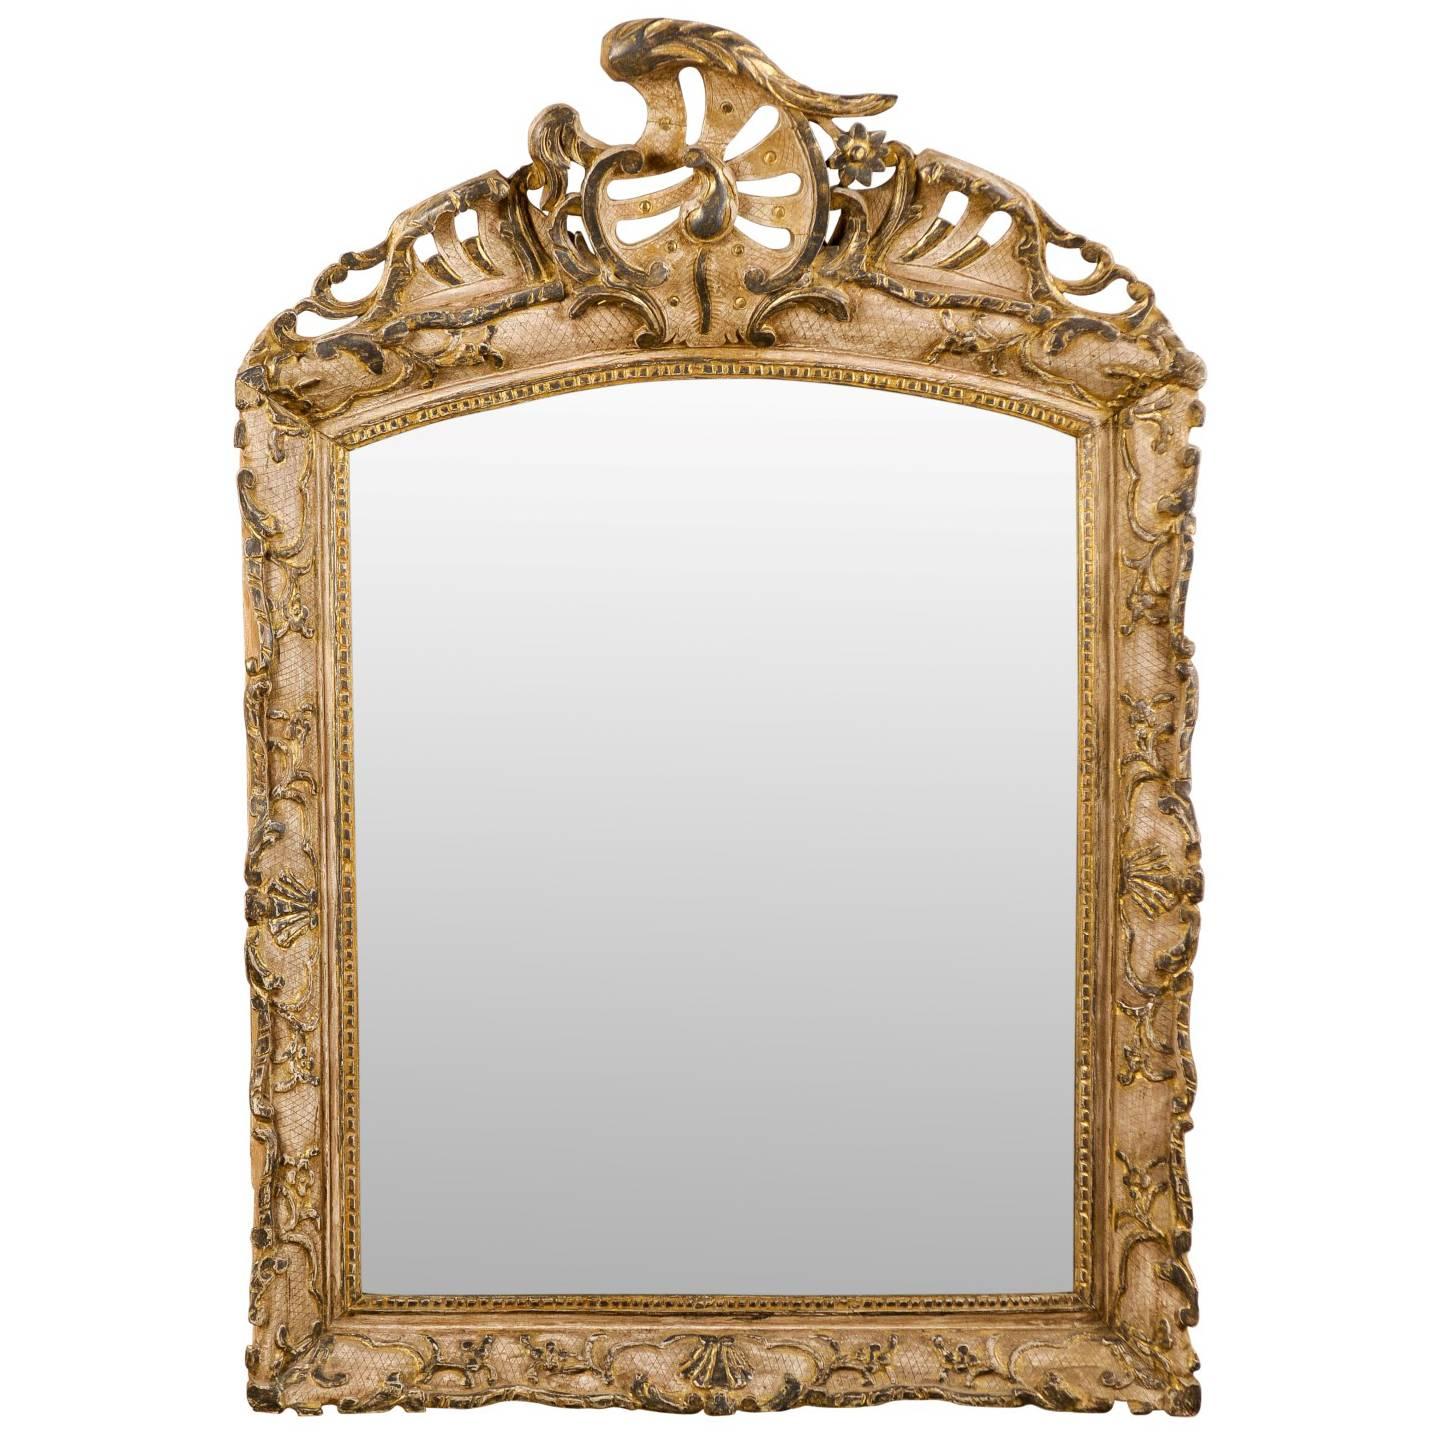 Italian Early 19th C. Rococo Style Mirror with Beautiful Pierce-Carved Crest For Sale